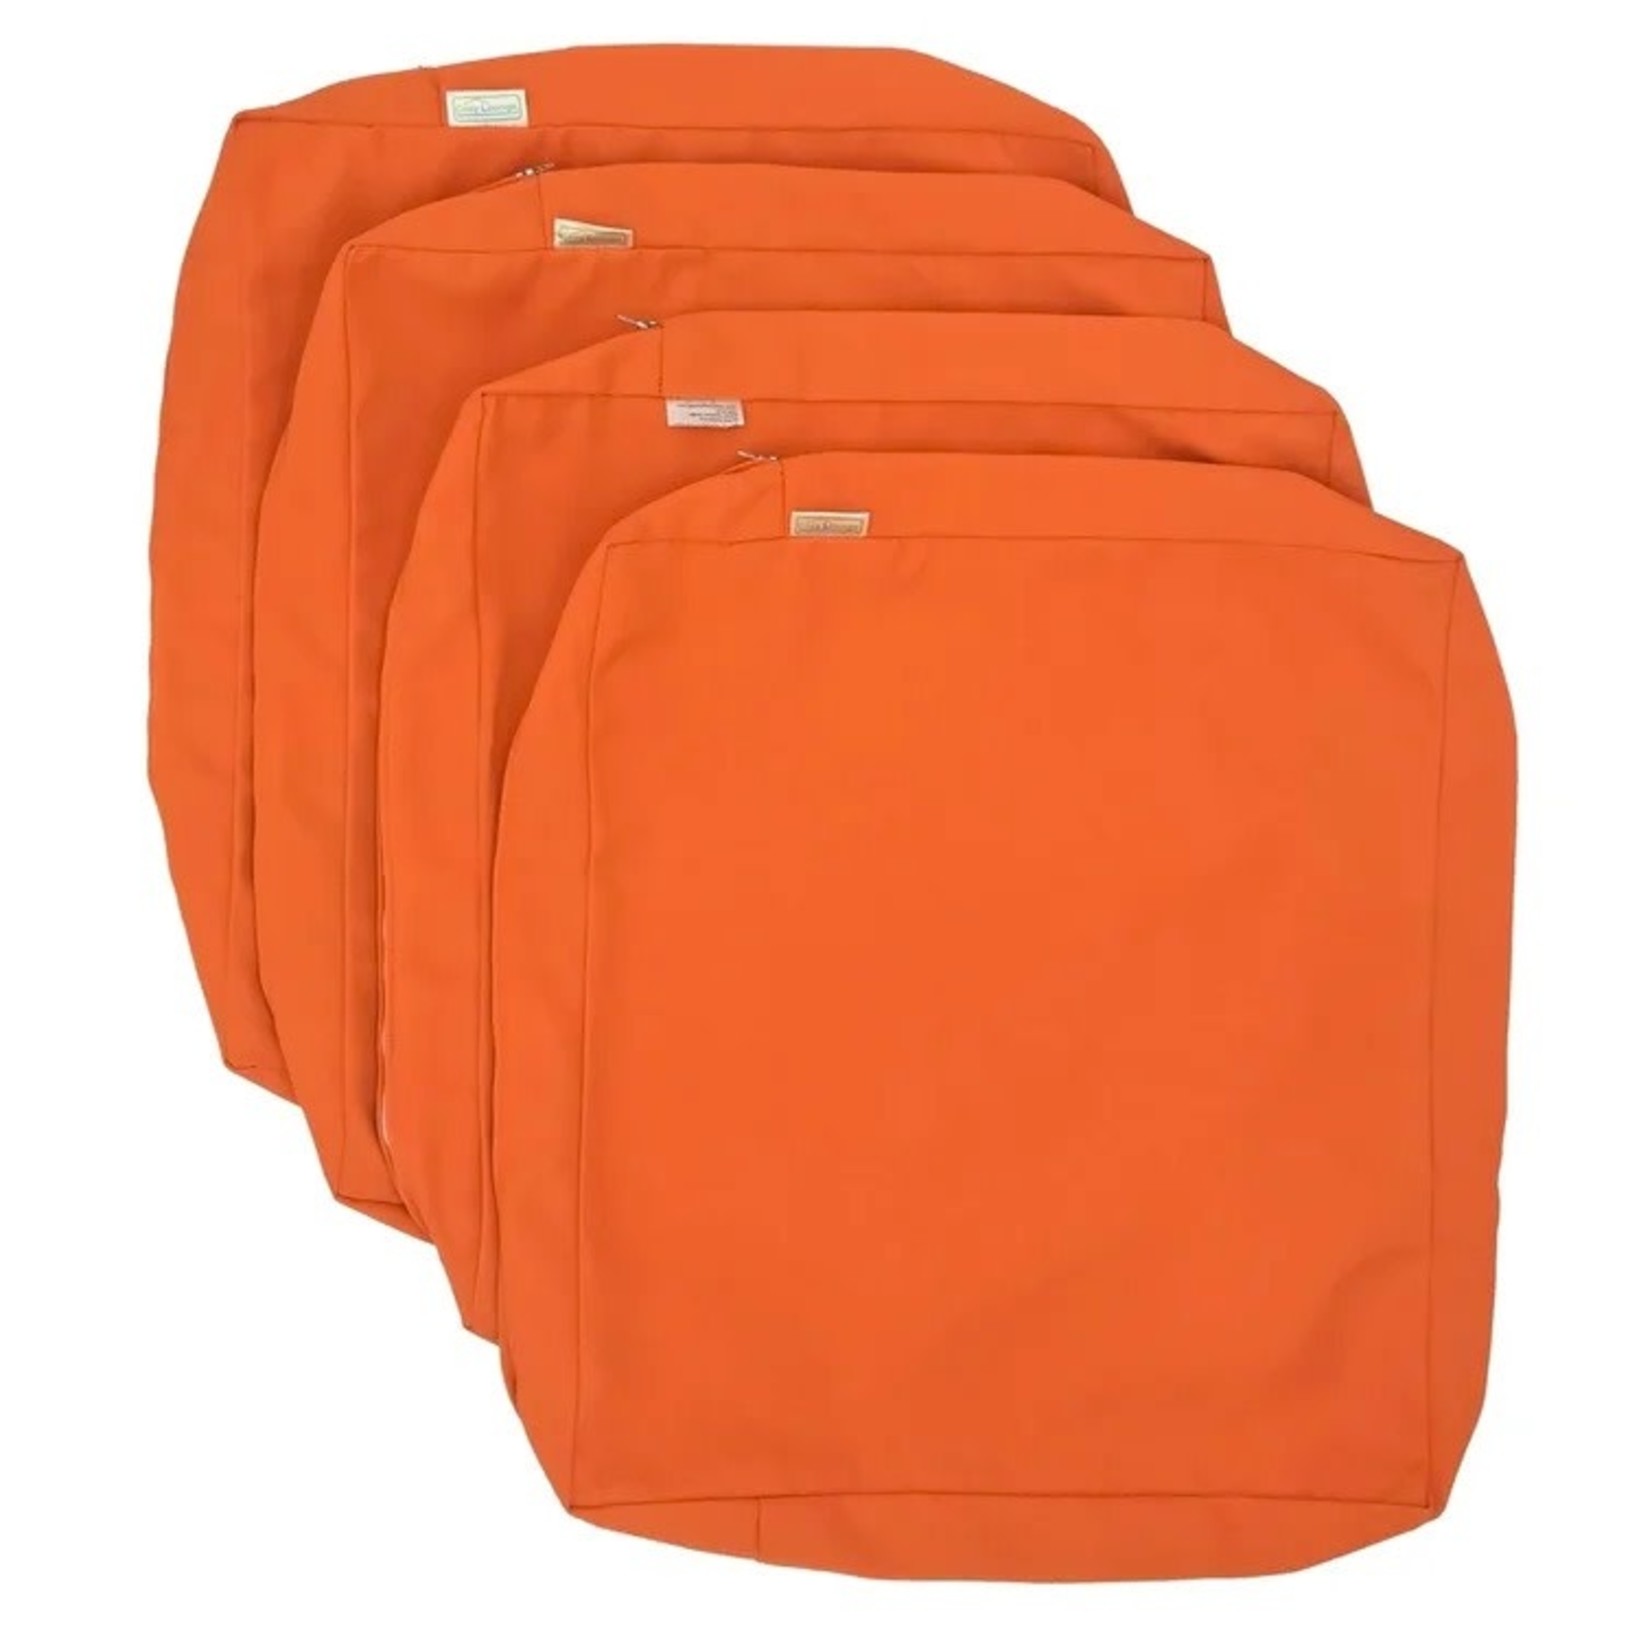 *COVERS ONLY - 17.5" x 18" Indoor/Outdoor Dining Chair Cushion Covers - Set of 4 - Orange - Final Sale